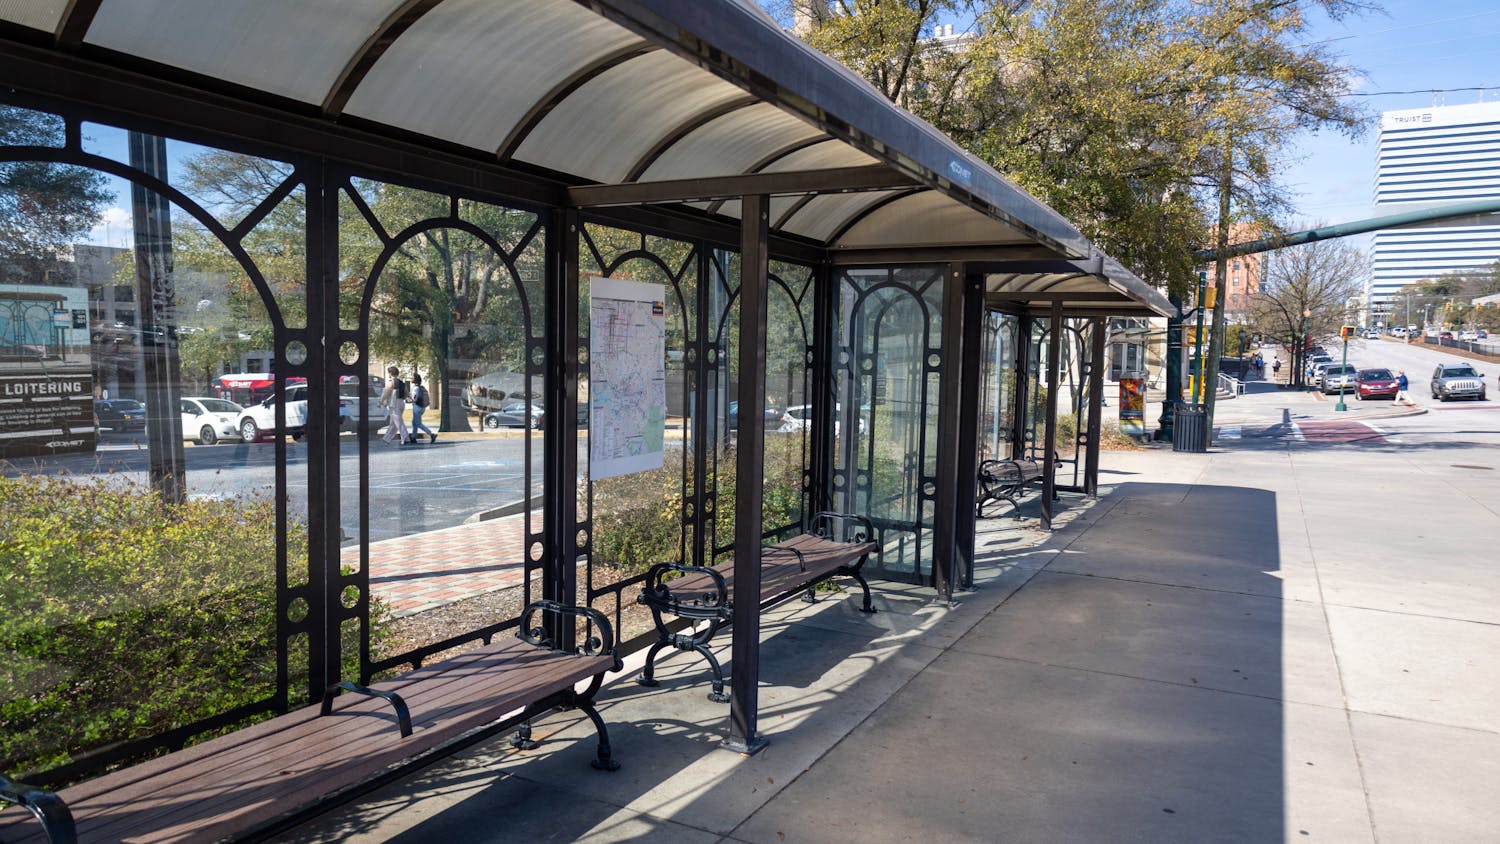 Sitting at the intersection between Assembly Street and College Street, the Comet bus stop is seen with bars in the middle of the benches on Feb. 23, 2023. The extra bar is seen as a way for the local authorities to stop people from being able to lay down on the benches. &nbsp;